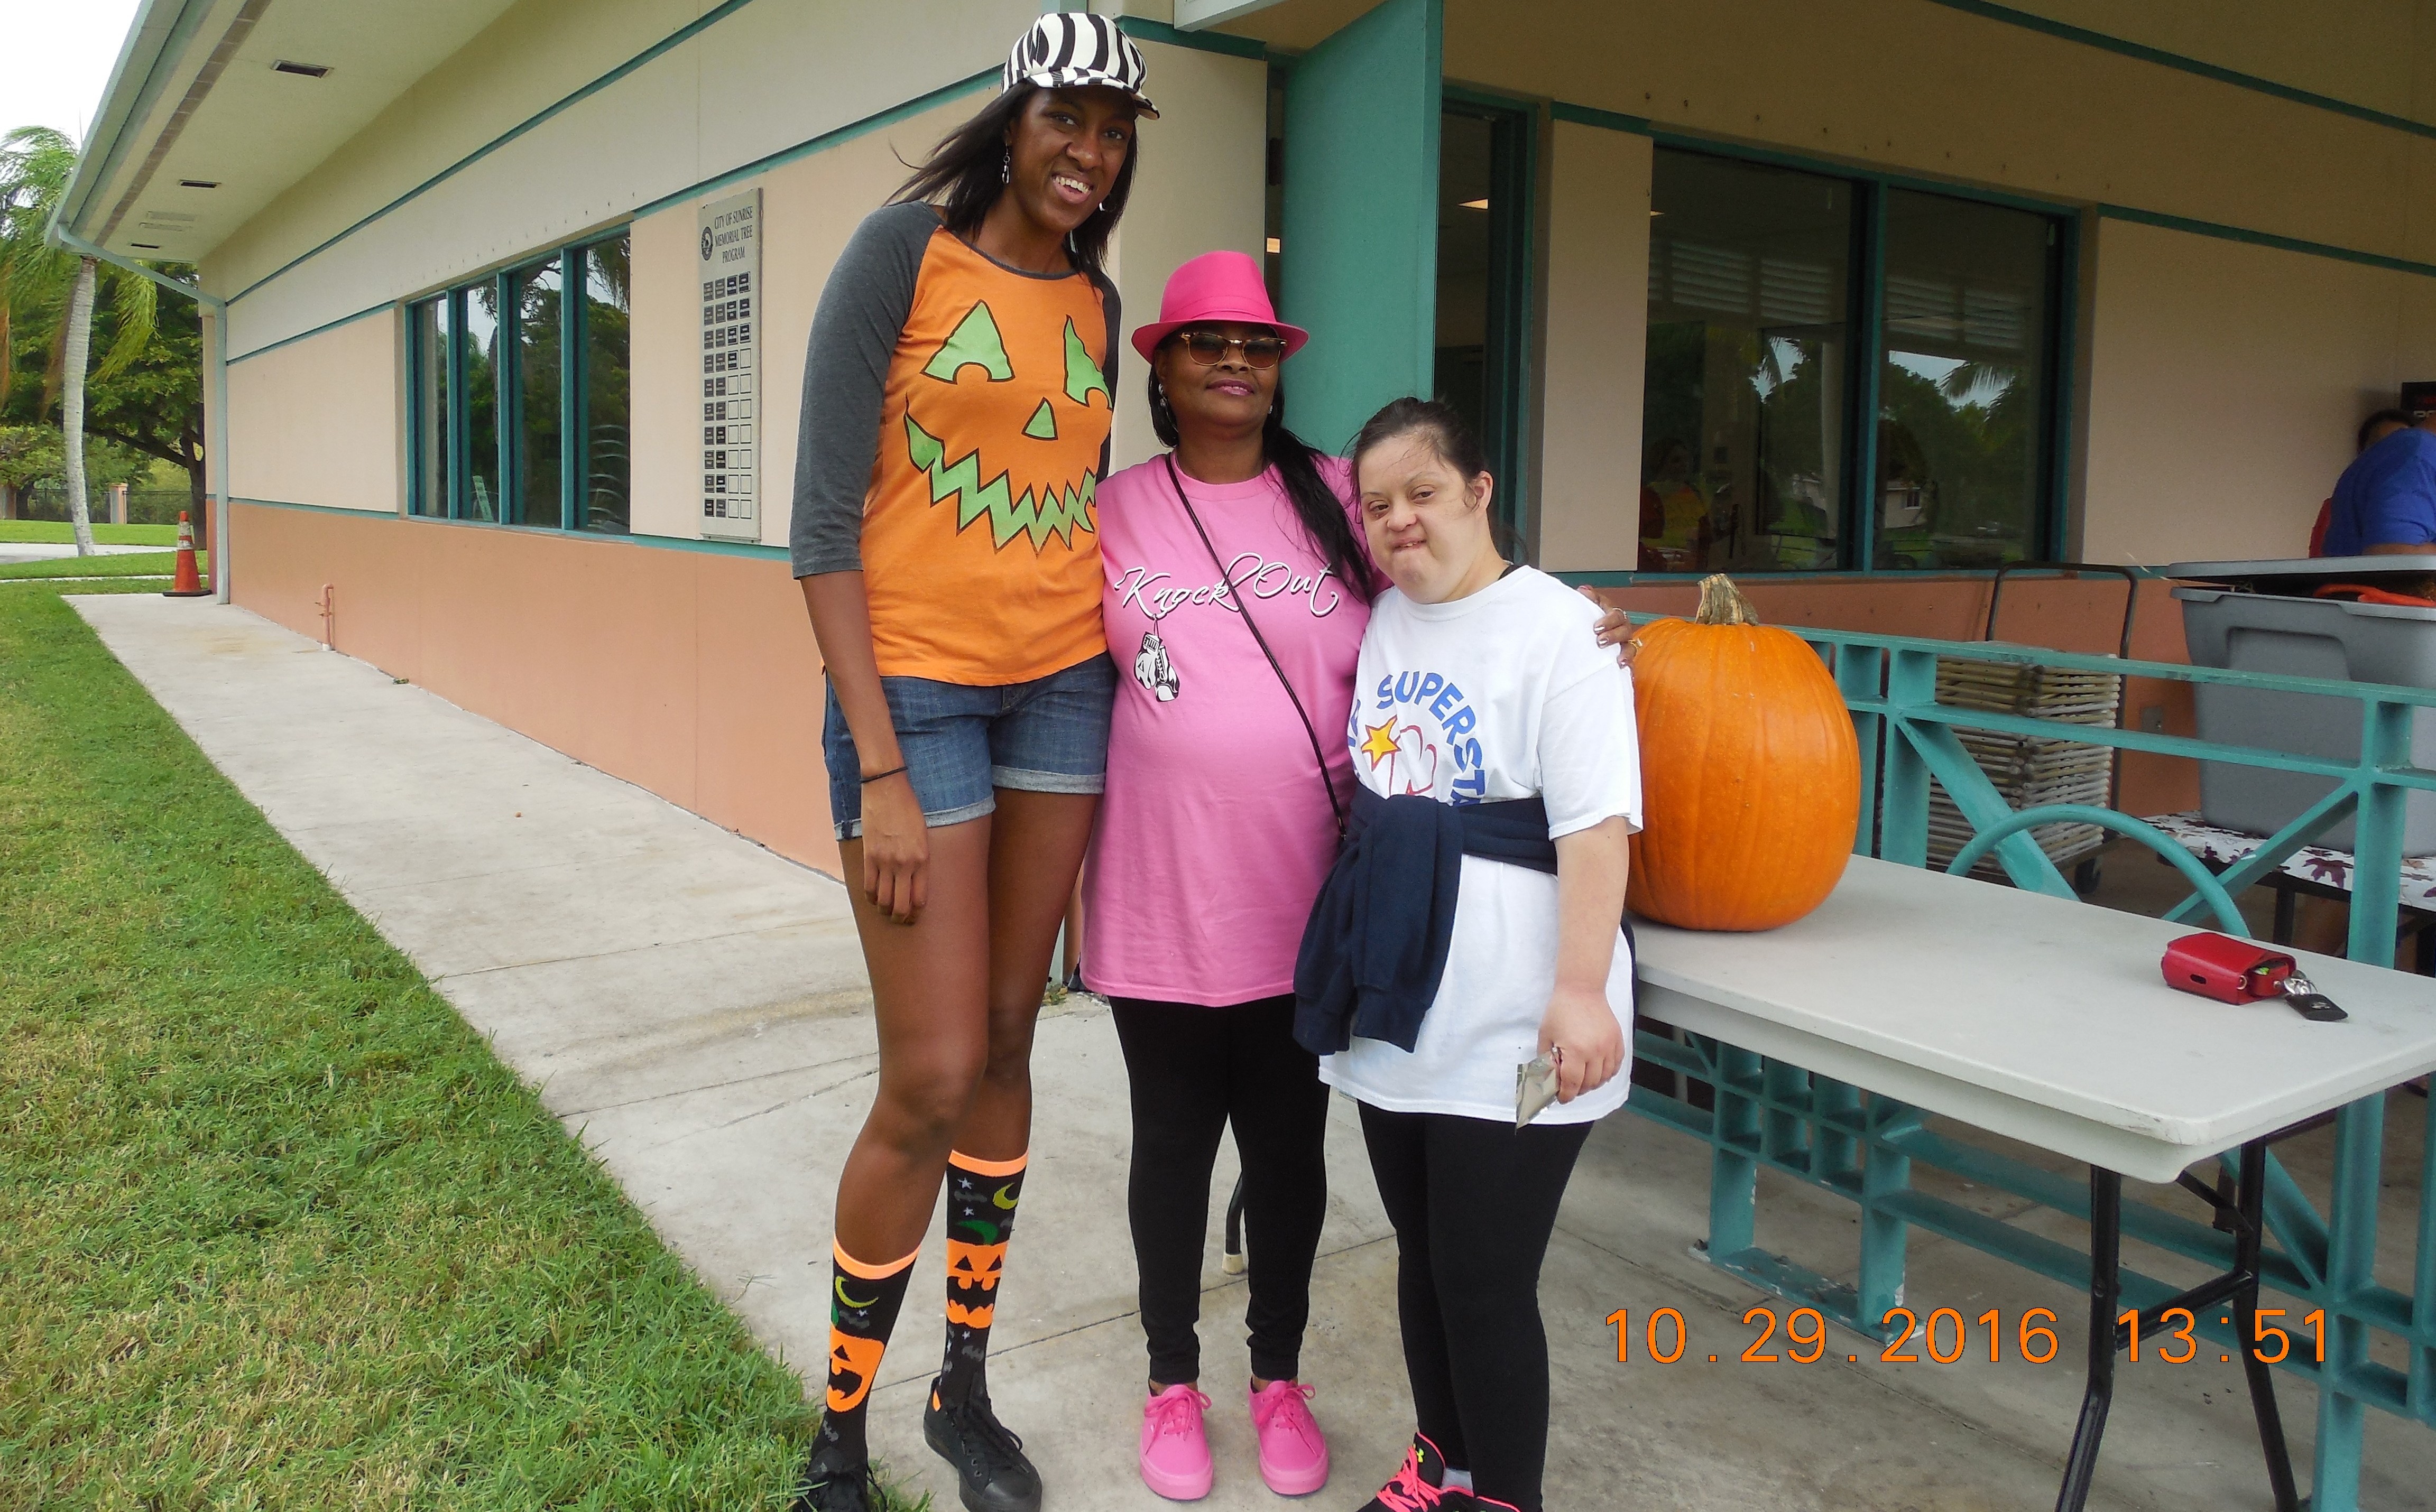 Three women of various ages stand next to a pumpkin